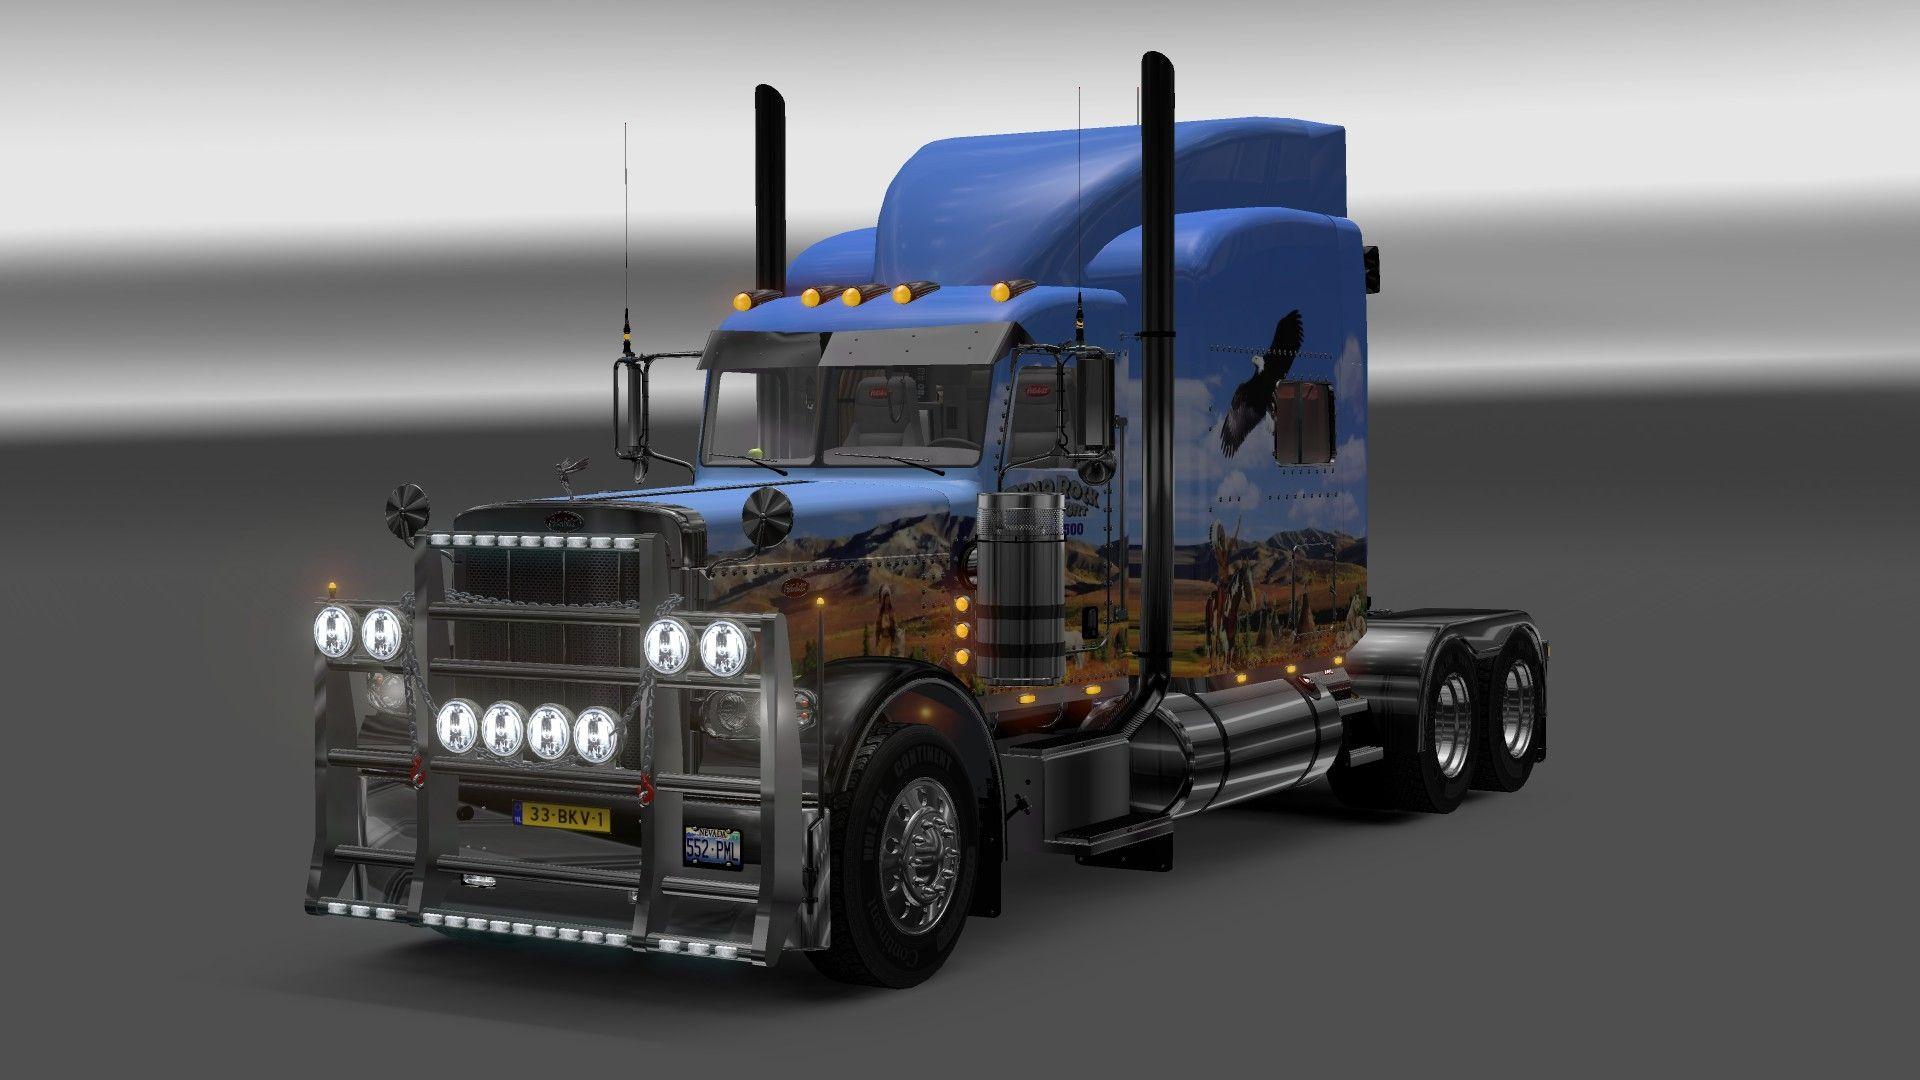 Euro Truck Simulator 2 Wallpapers free desktop backgrounds and wallpapers